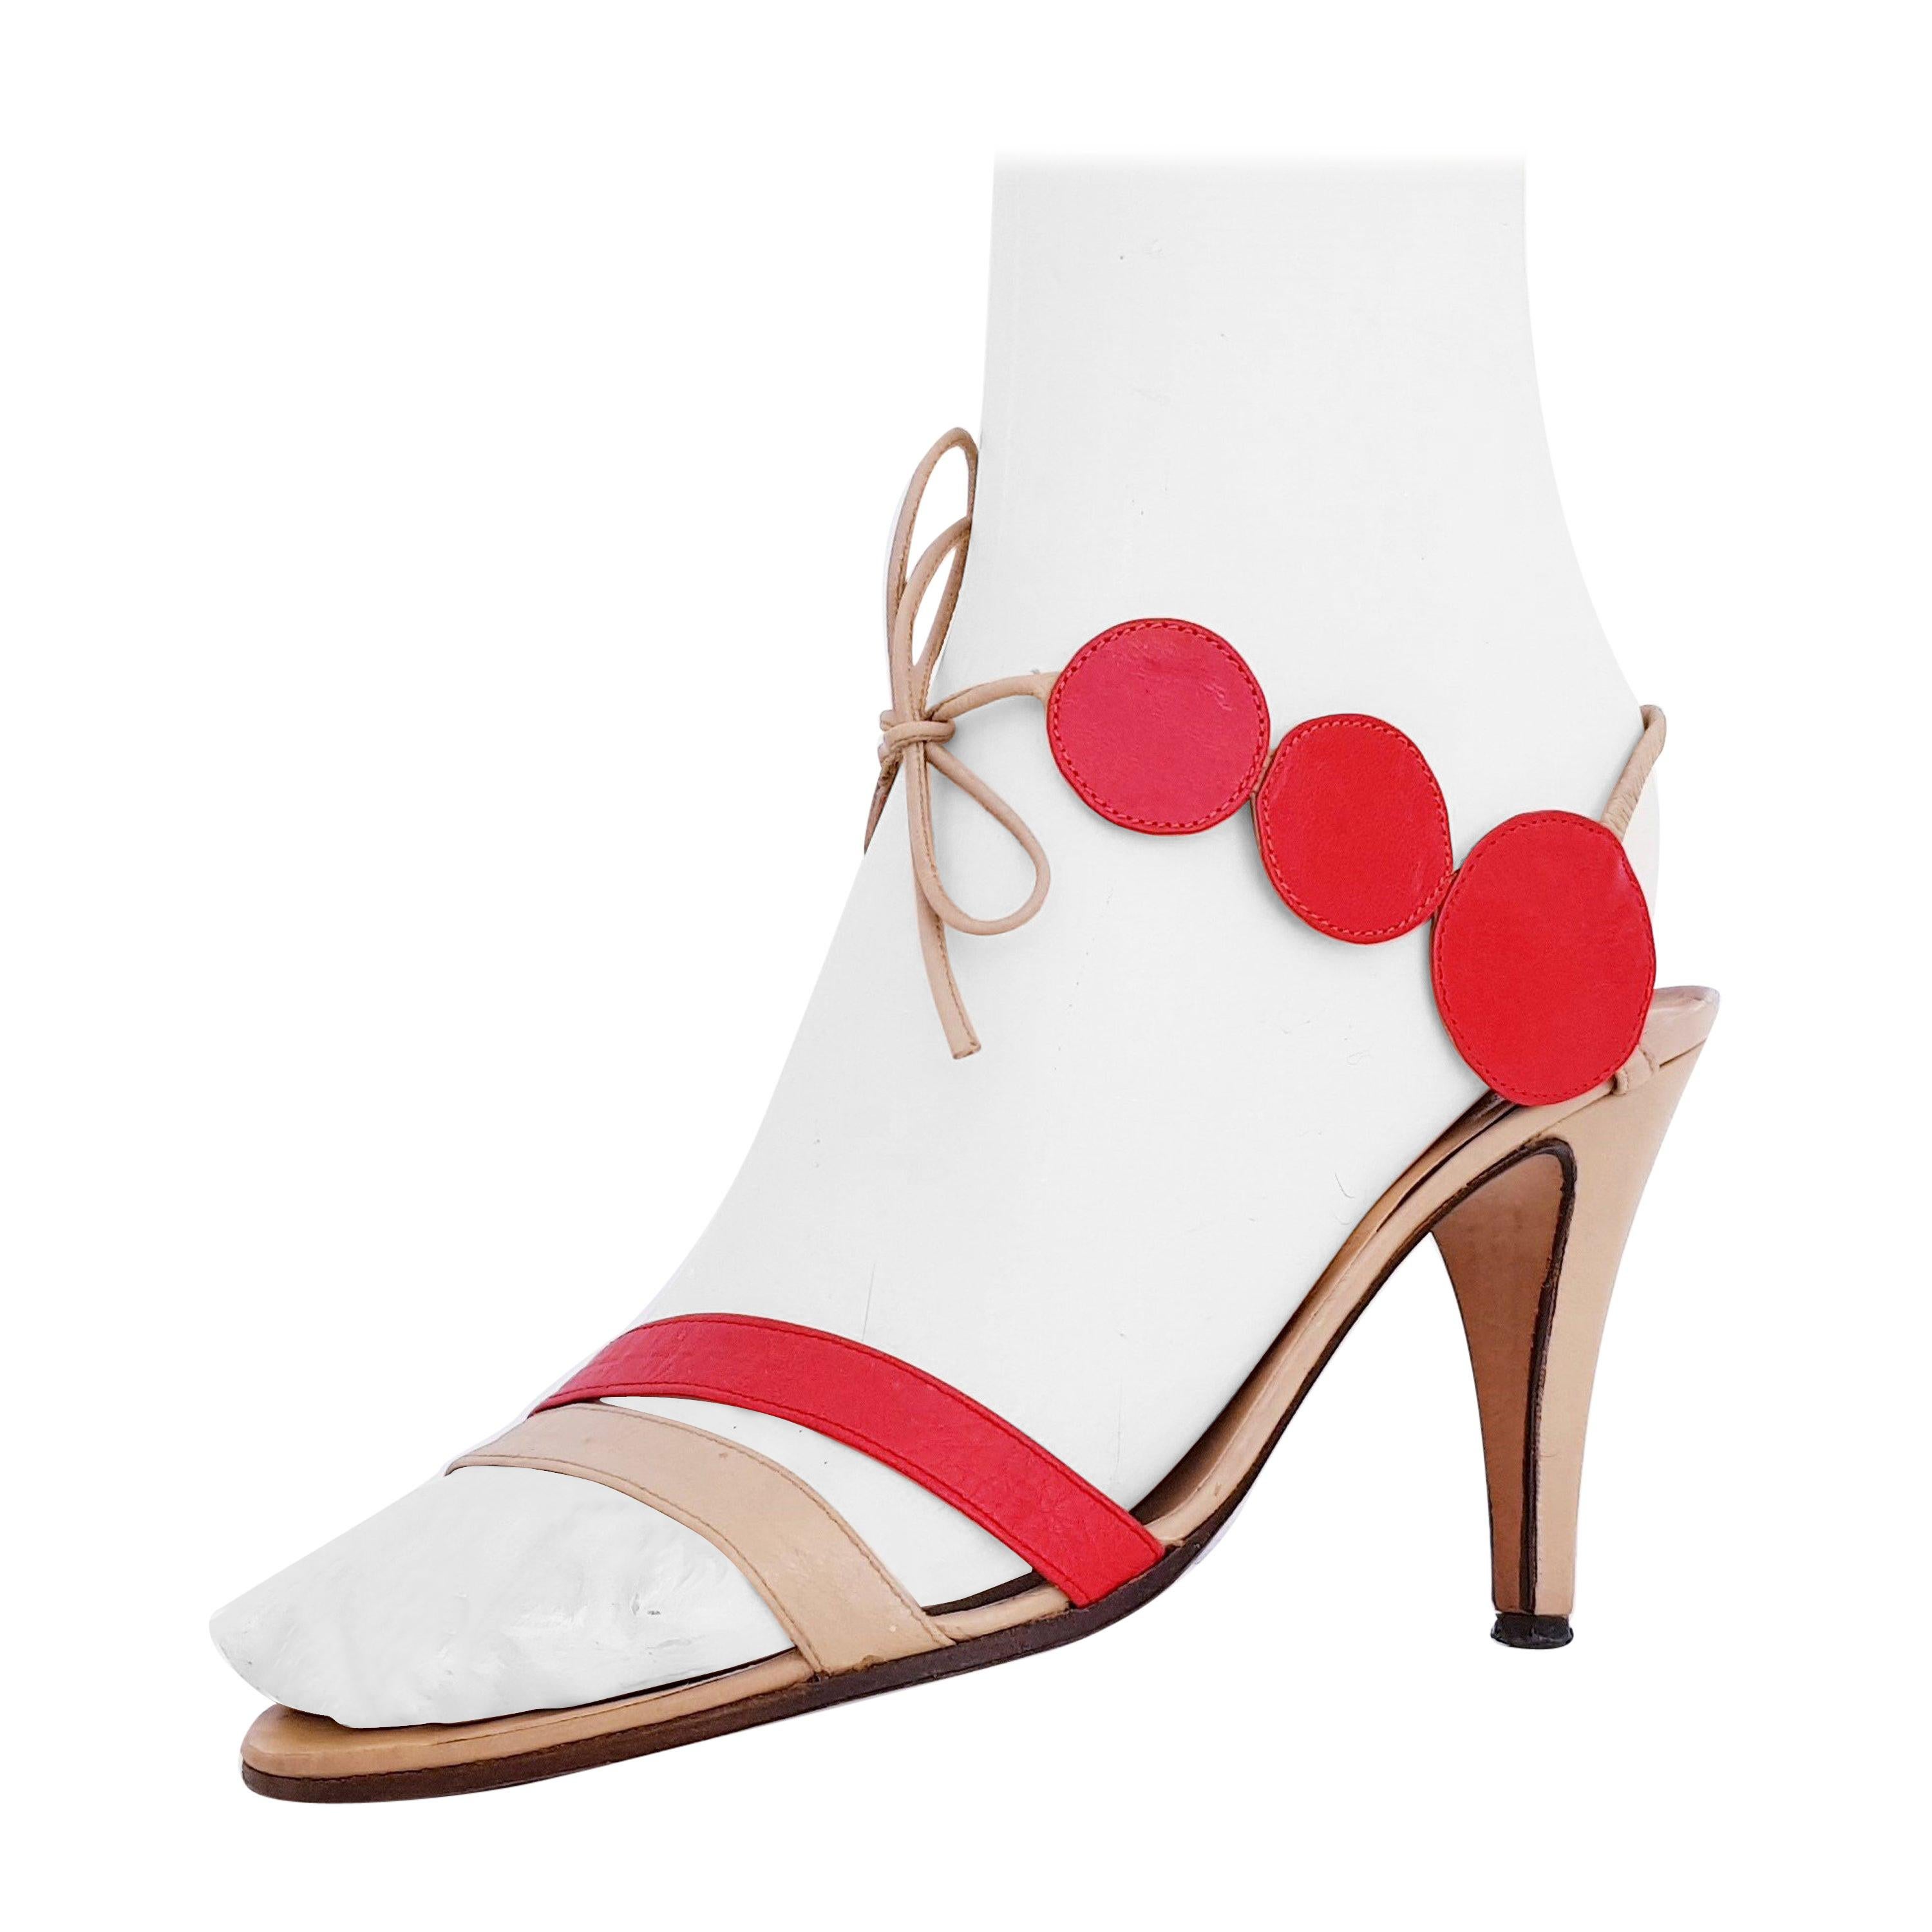 Dalco' Roma for Valentino Open High Heels circular red/beige design. Size 39 1/2 For Sale